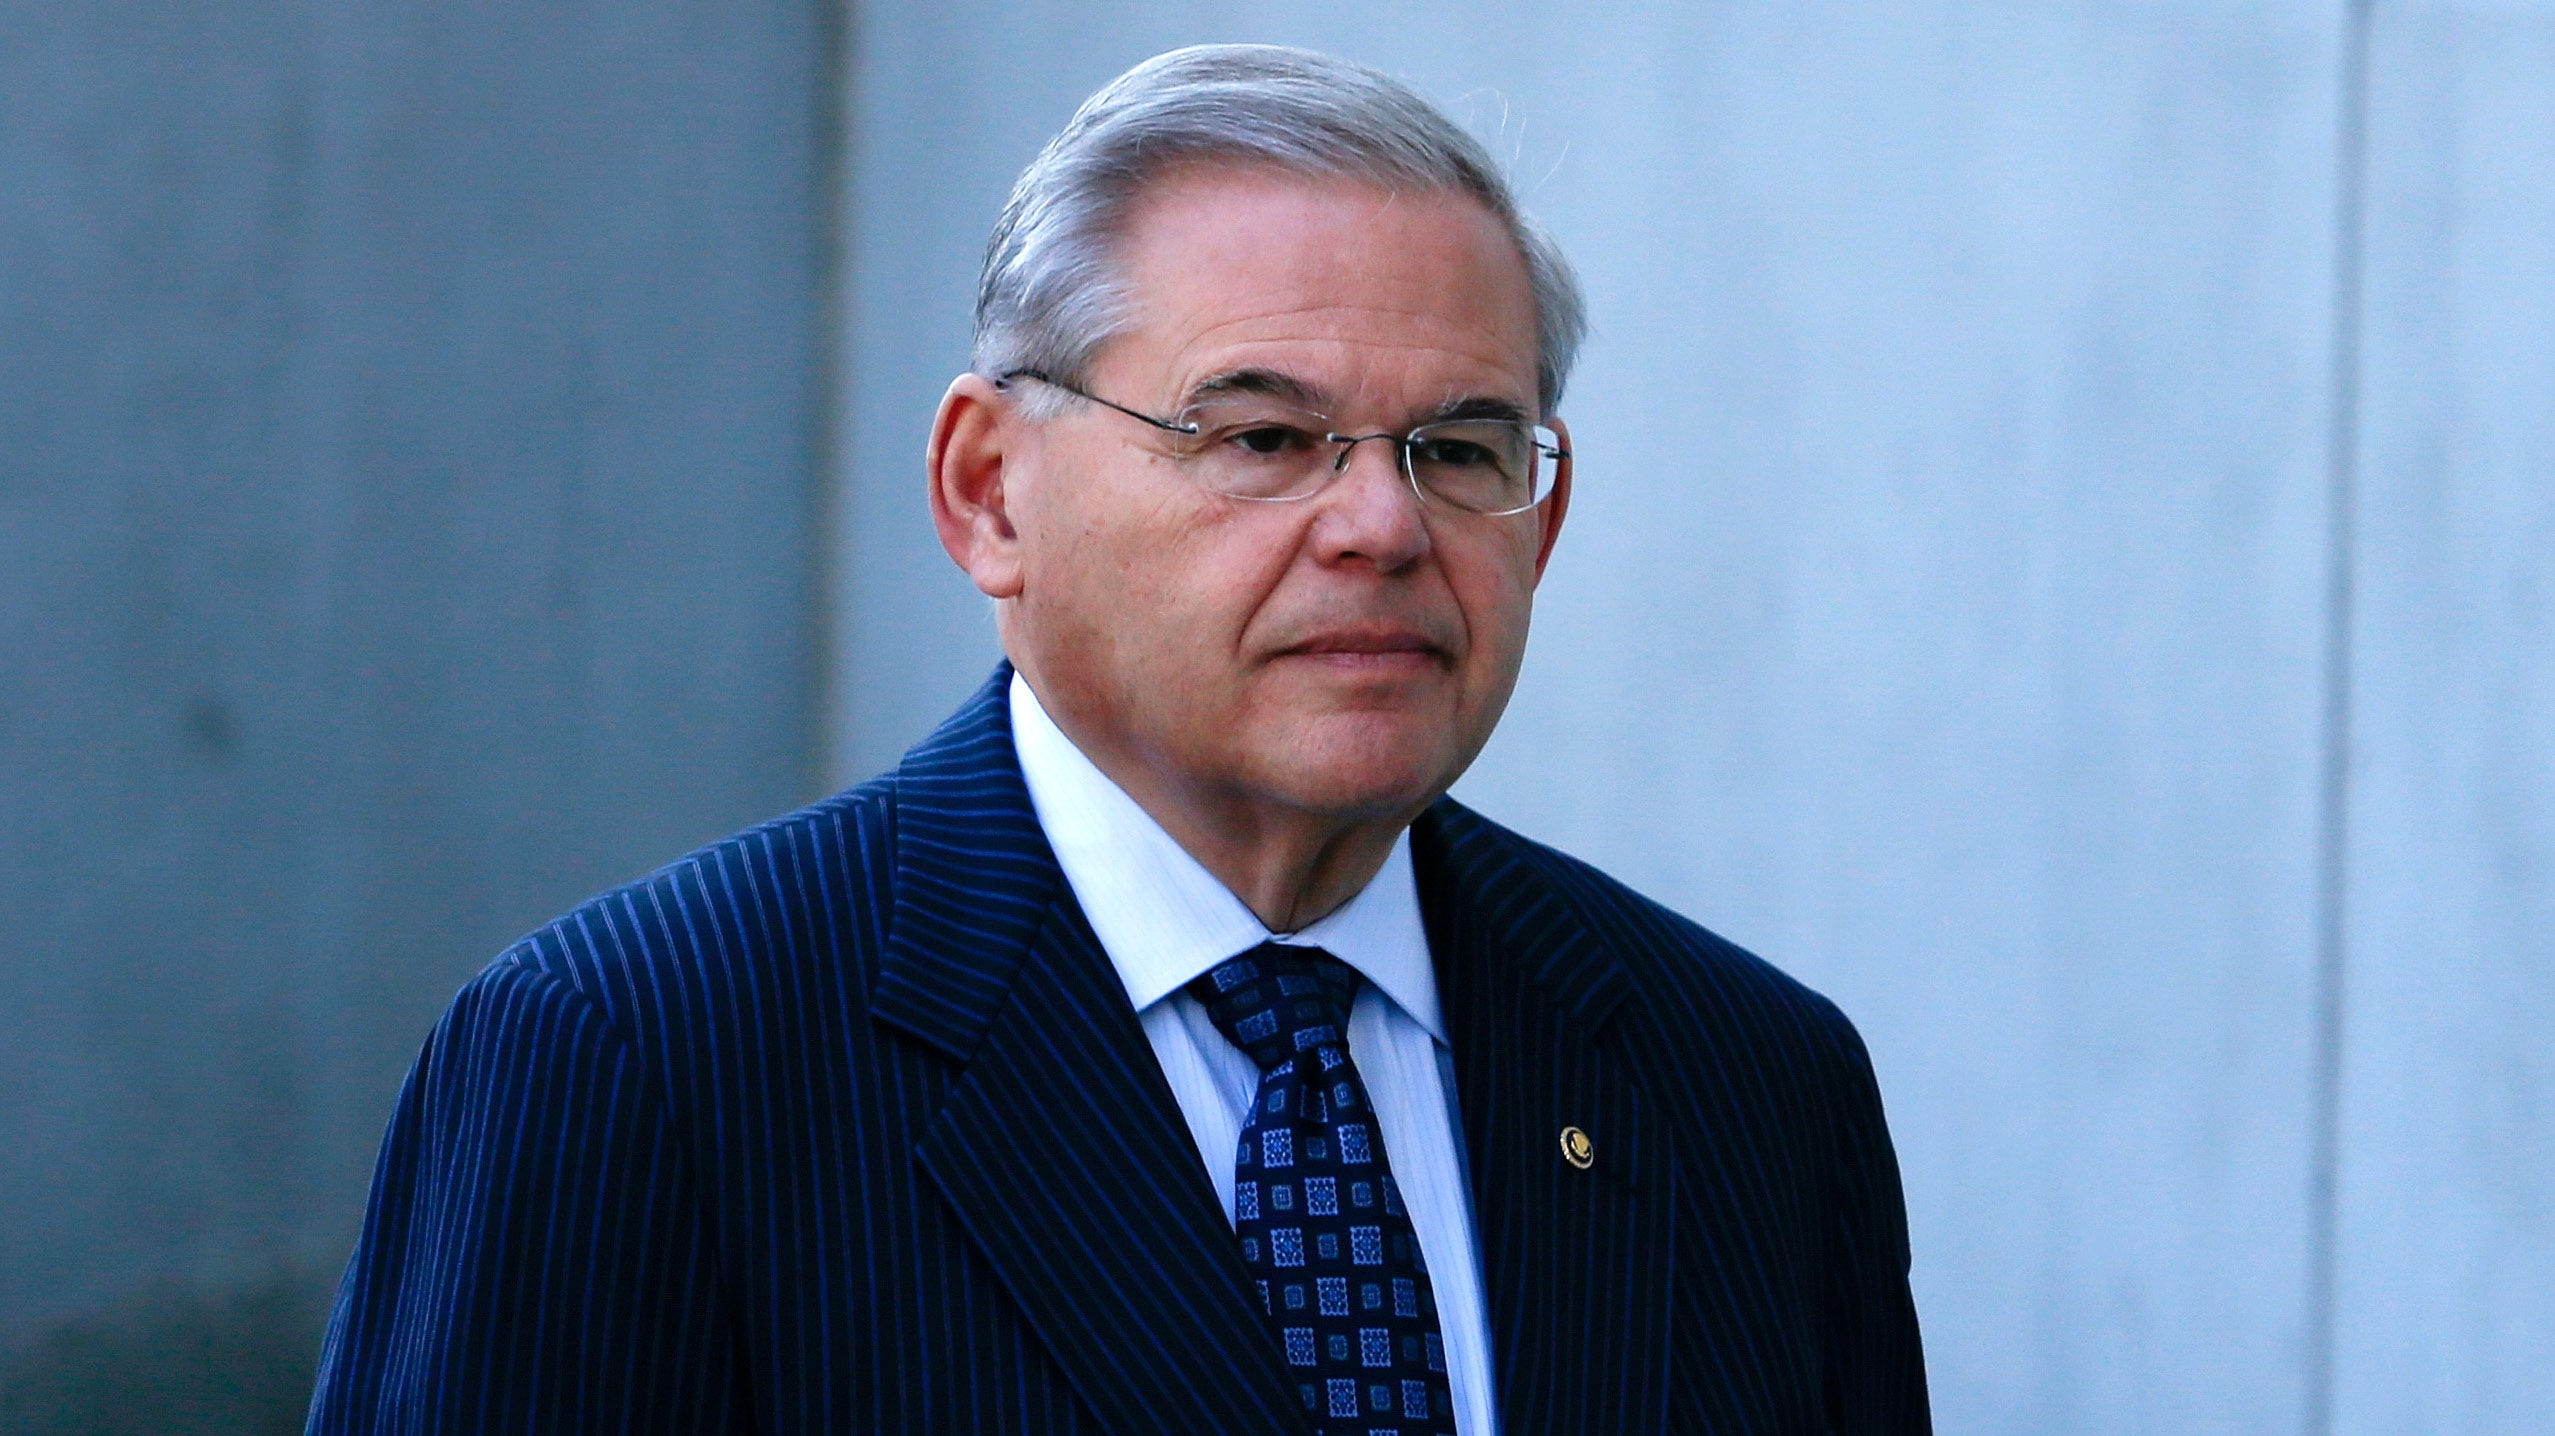 Judge to rule on Bob Menendez request to move corruption trial from New Jersey to Washington Fox News